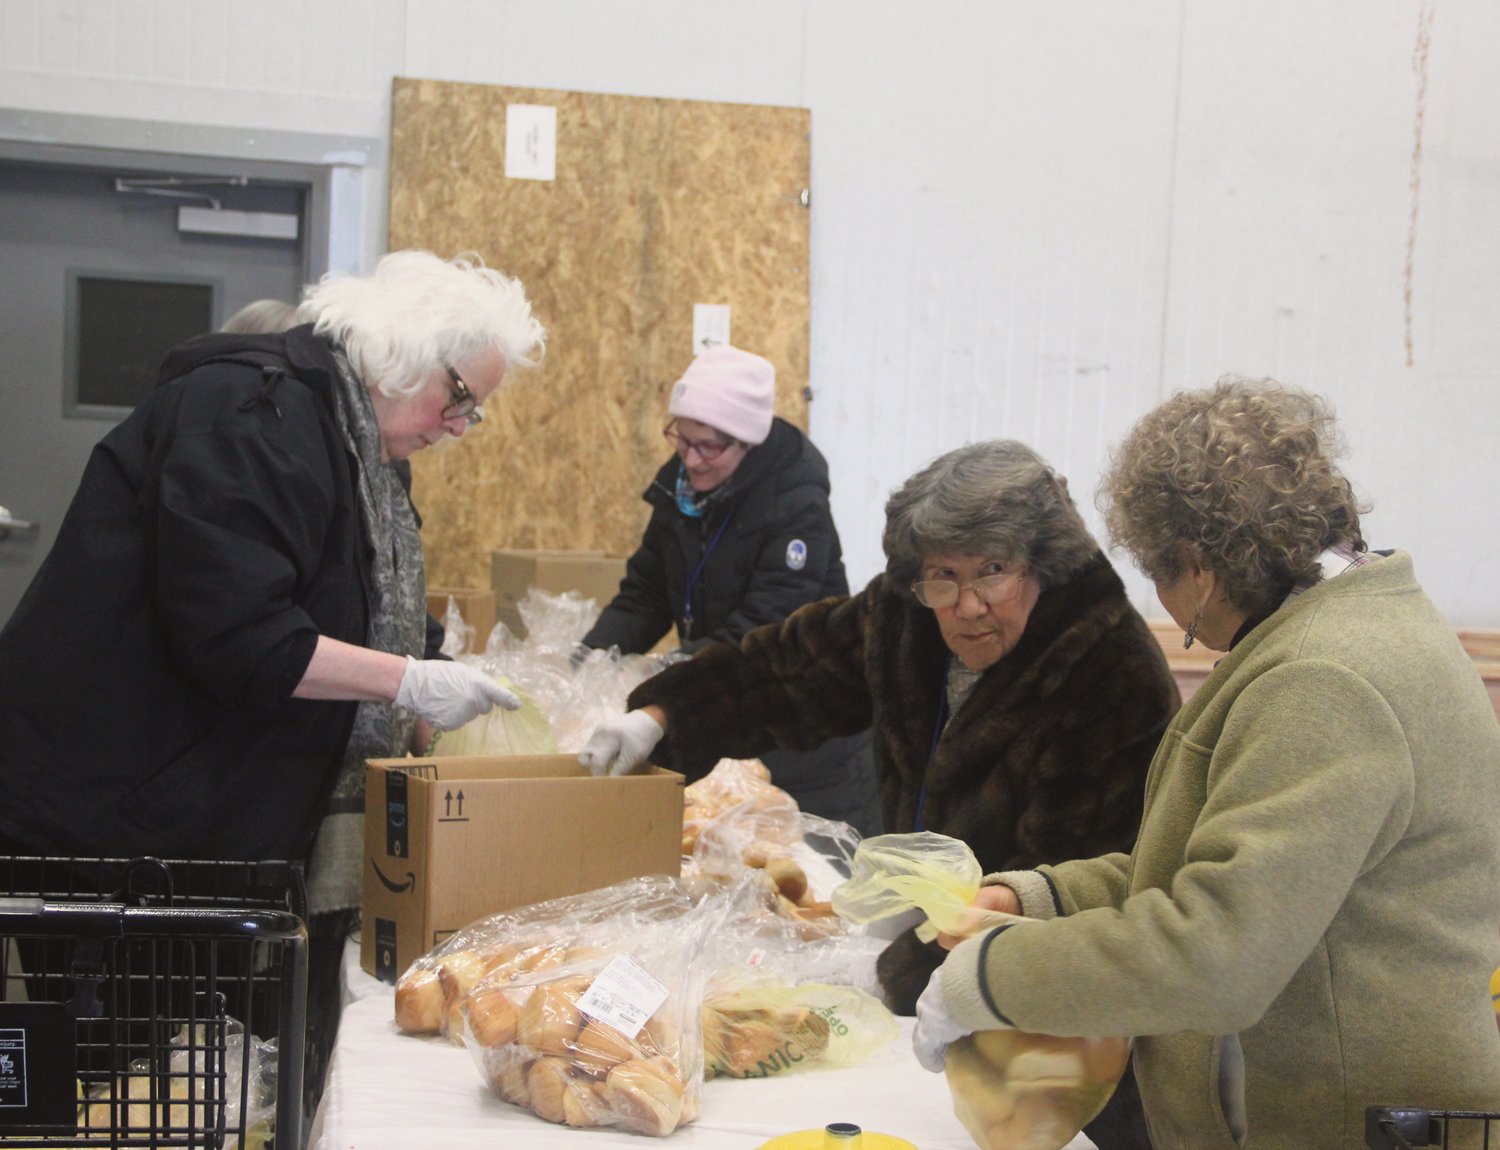 Community Assistance Program (CAP) volunteers sort bread rolls for the nonprofit’s Thanksgiving baskets on November 21. CAP planned to distribute over 200 baskets filled with traditional holiday fixings such as ham, cranberry sauce, stuffing mix and canned green beans behind Cost Cutter. From l.; Evelyne Hendricks, Barb VanSwearingen, Mary Ellen Rathe and Jackie Braverman.